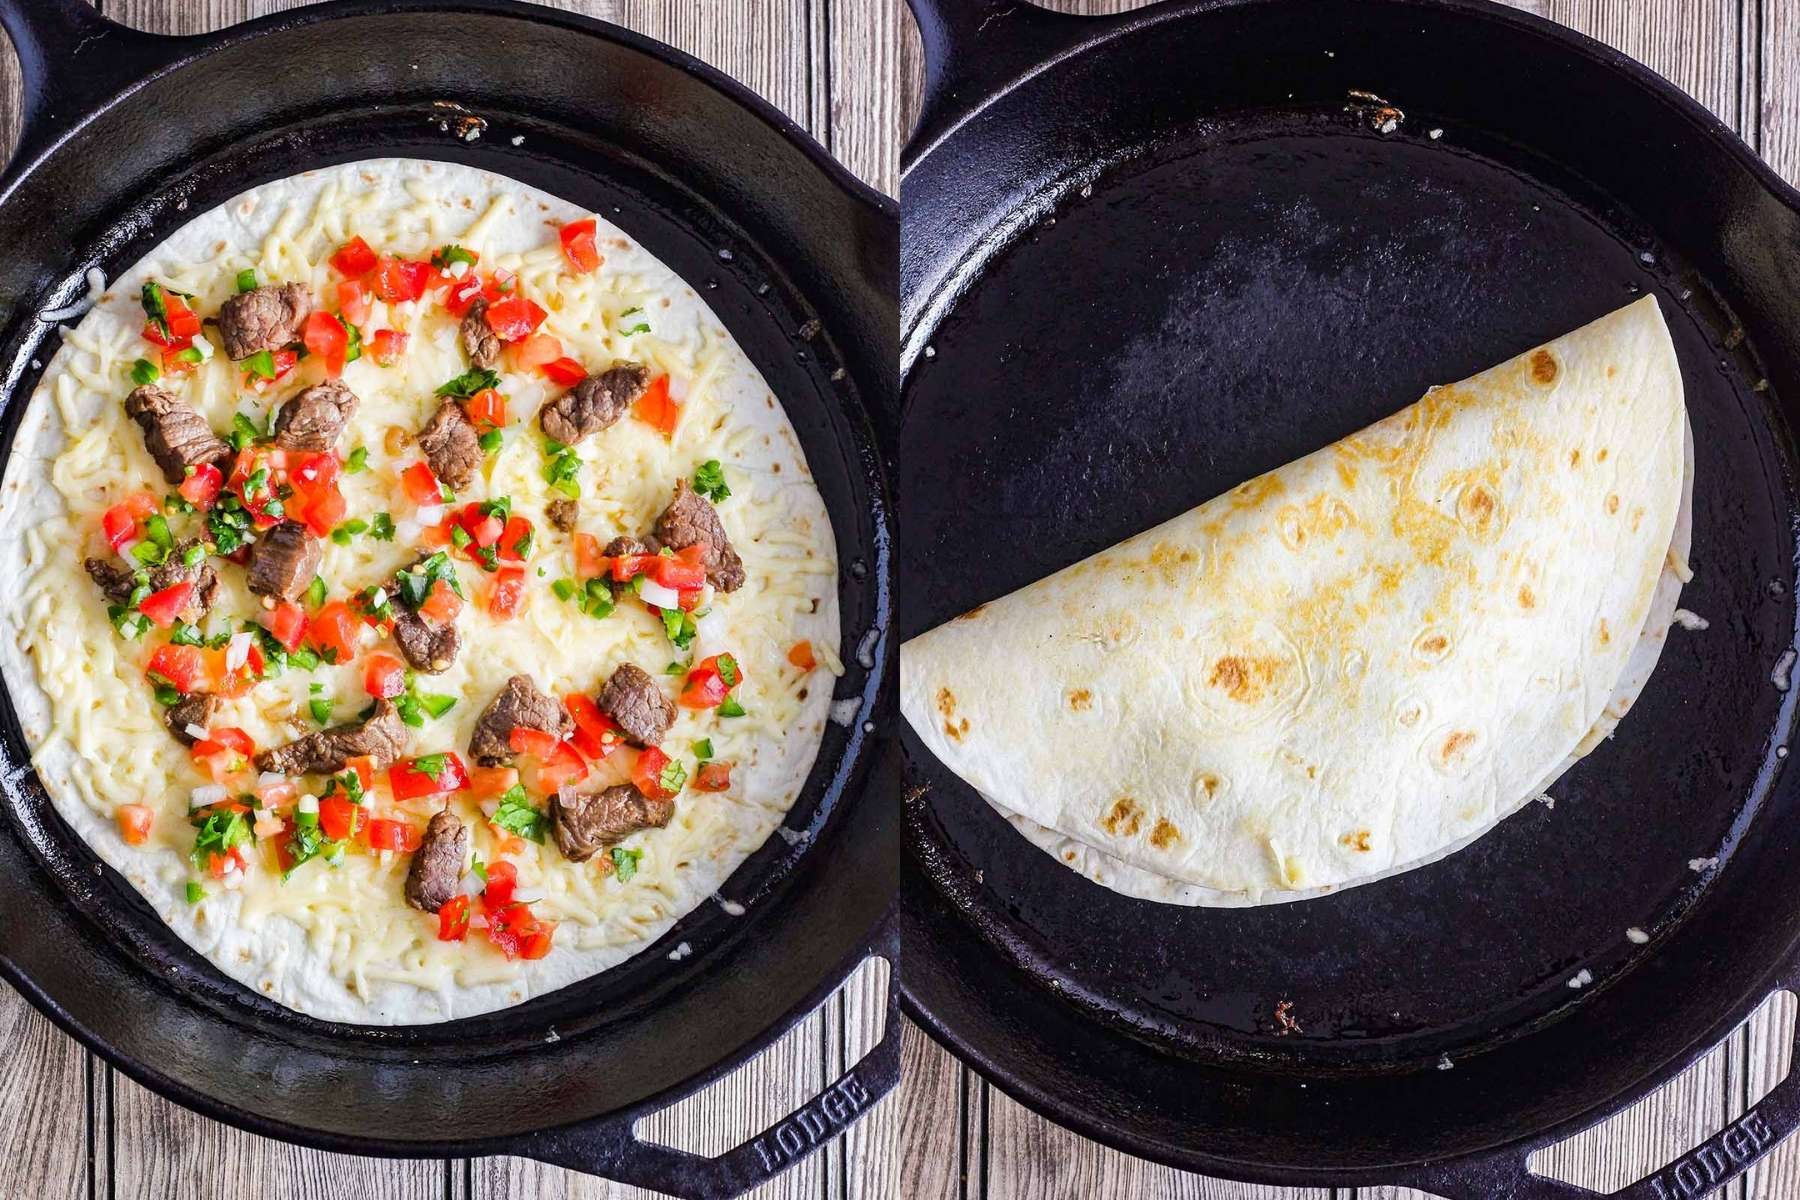 Two stages of quesadilla cooking.